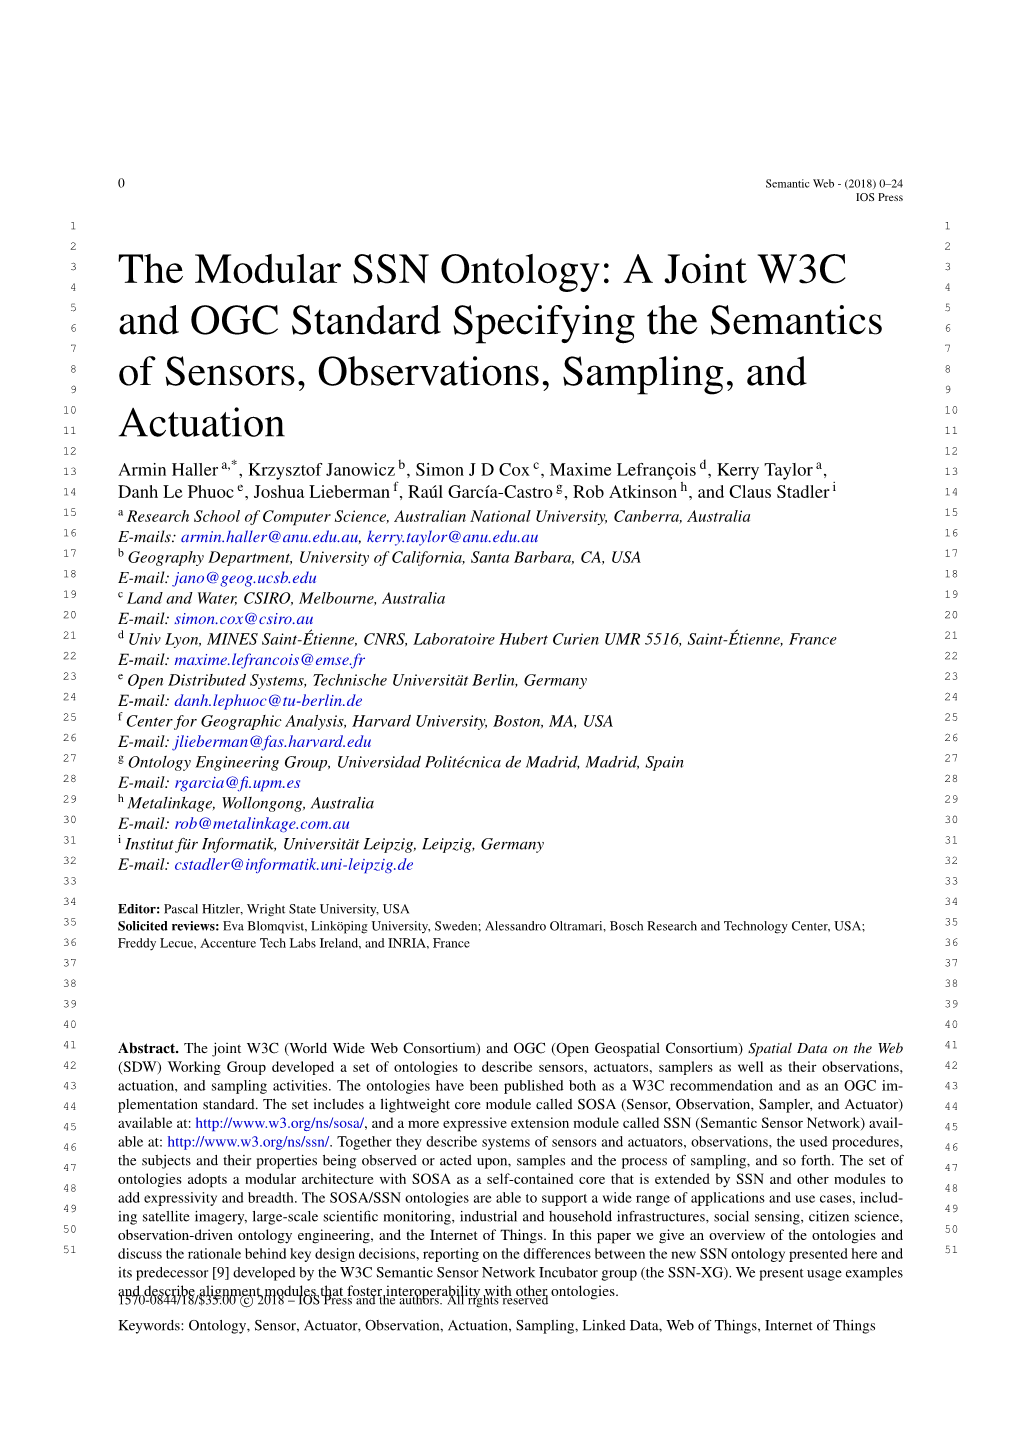 The Modular SSN Ontology: a Joint W3C and OGC Standard Specifying